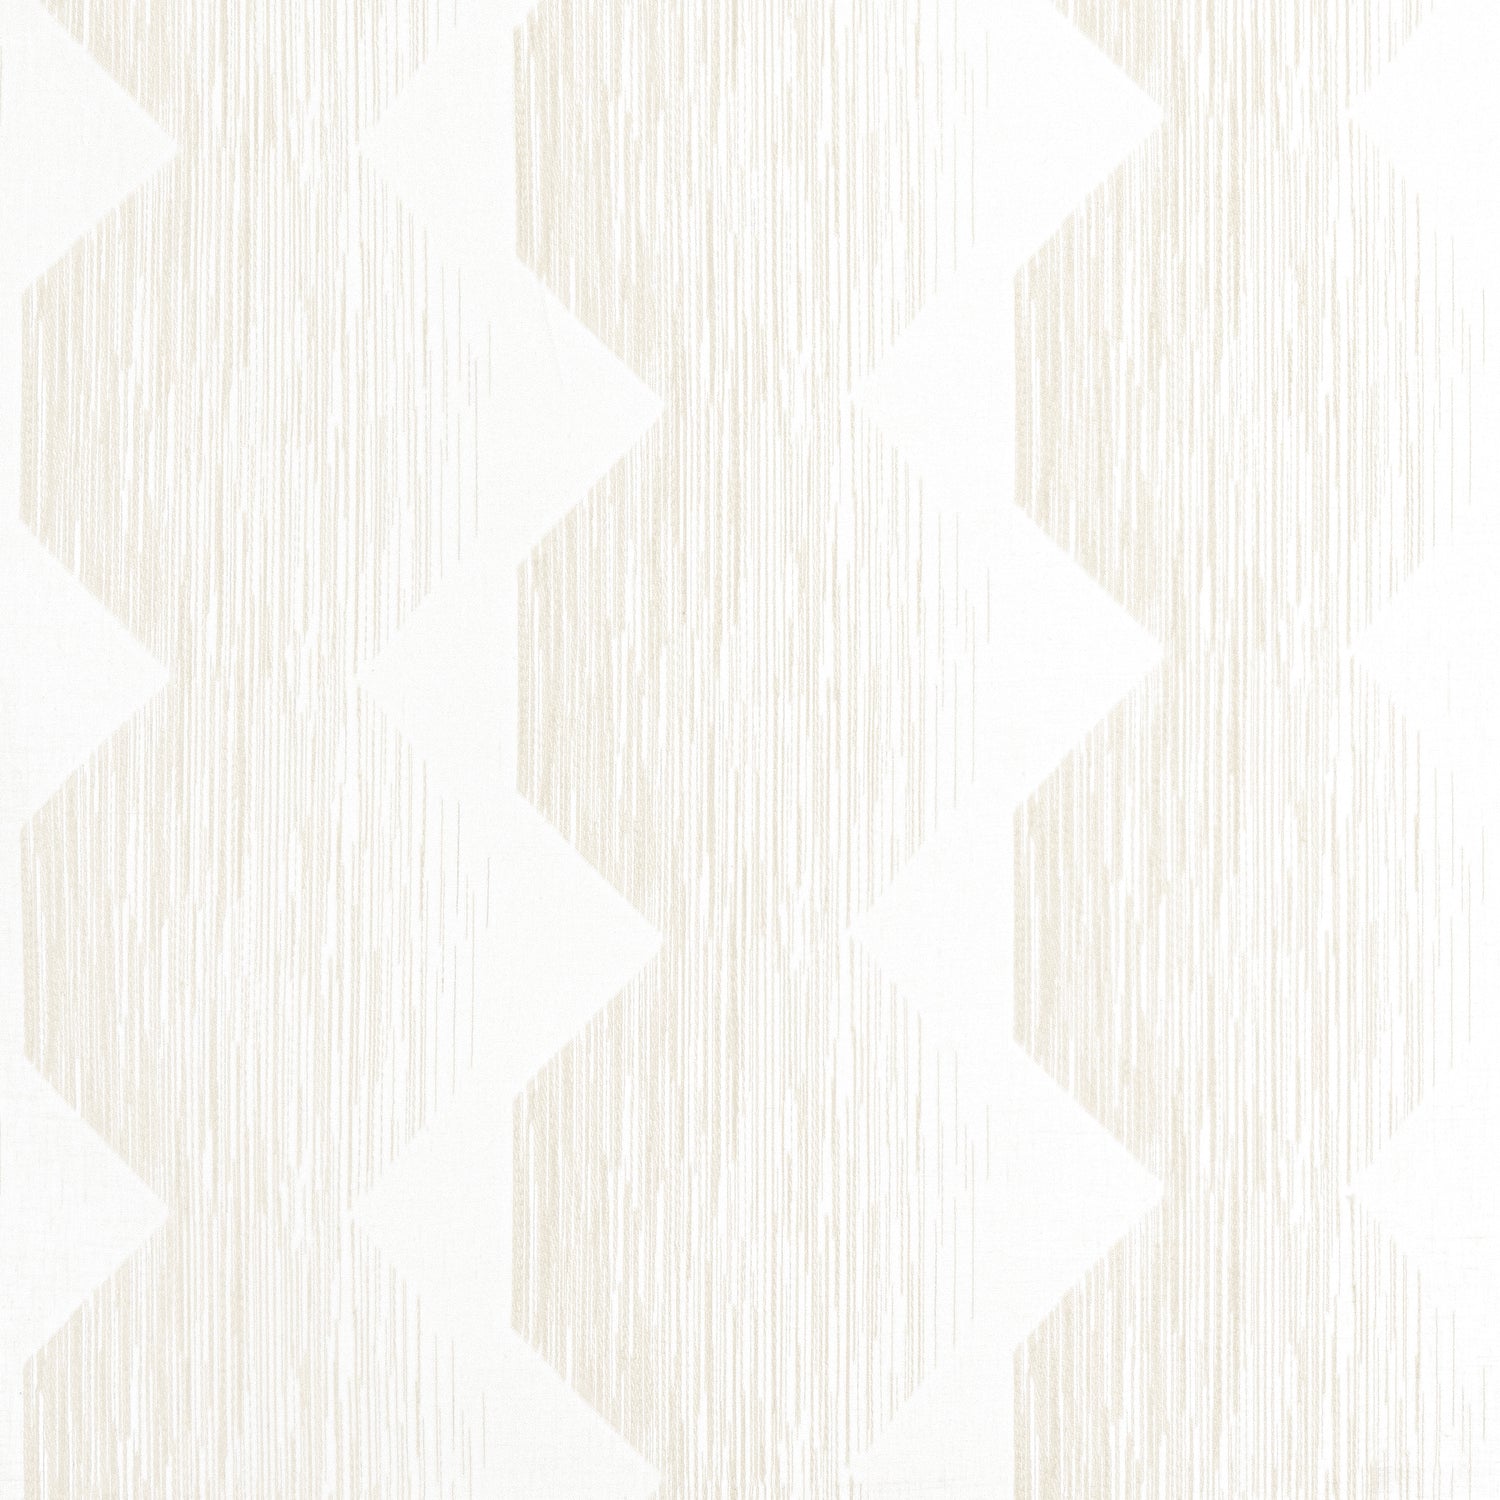 Enzo fabric in linen color - pattern number FWW8271 - by Thibaut in the Aura collection